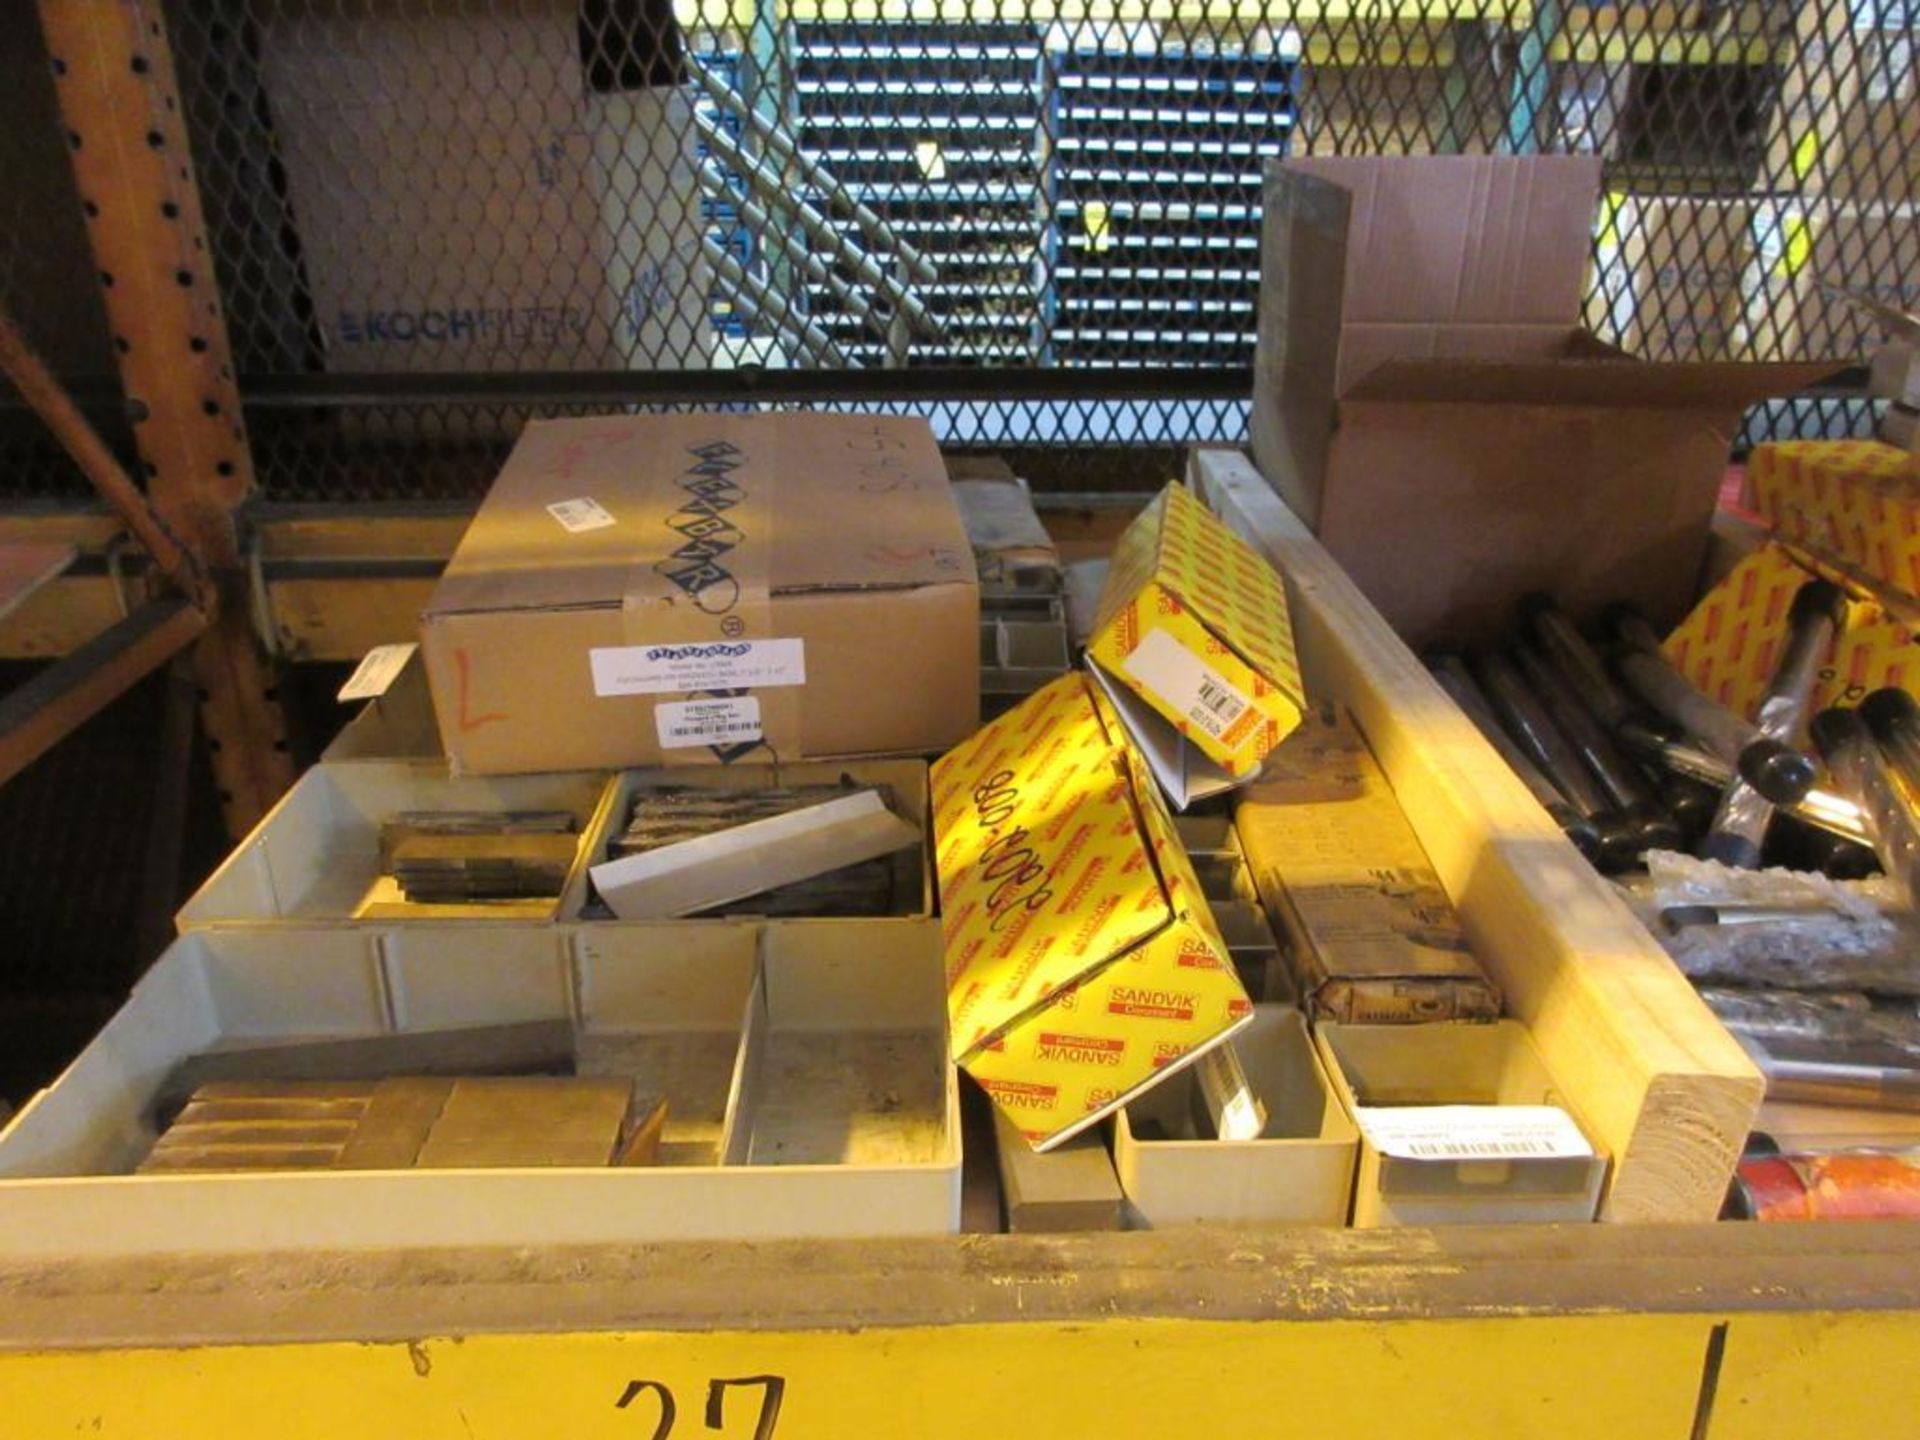 CONTENTS OF (22) SECTIONS PALLET RACK: ASSORTED ABRASIVES, SUNNEN STONES, TOOL BITS, DOVETAIL CUTTER - Image 4 of 43